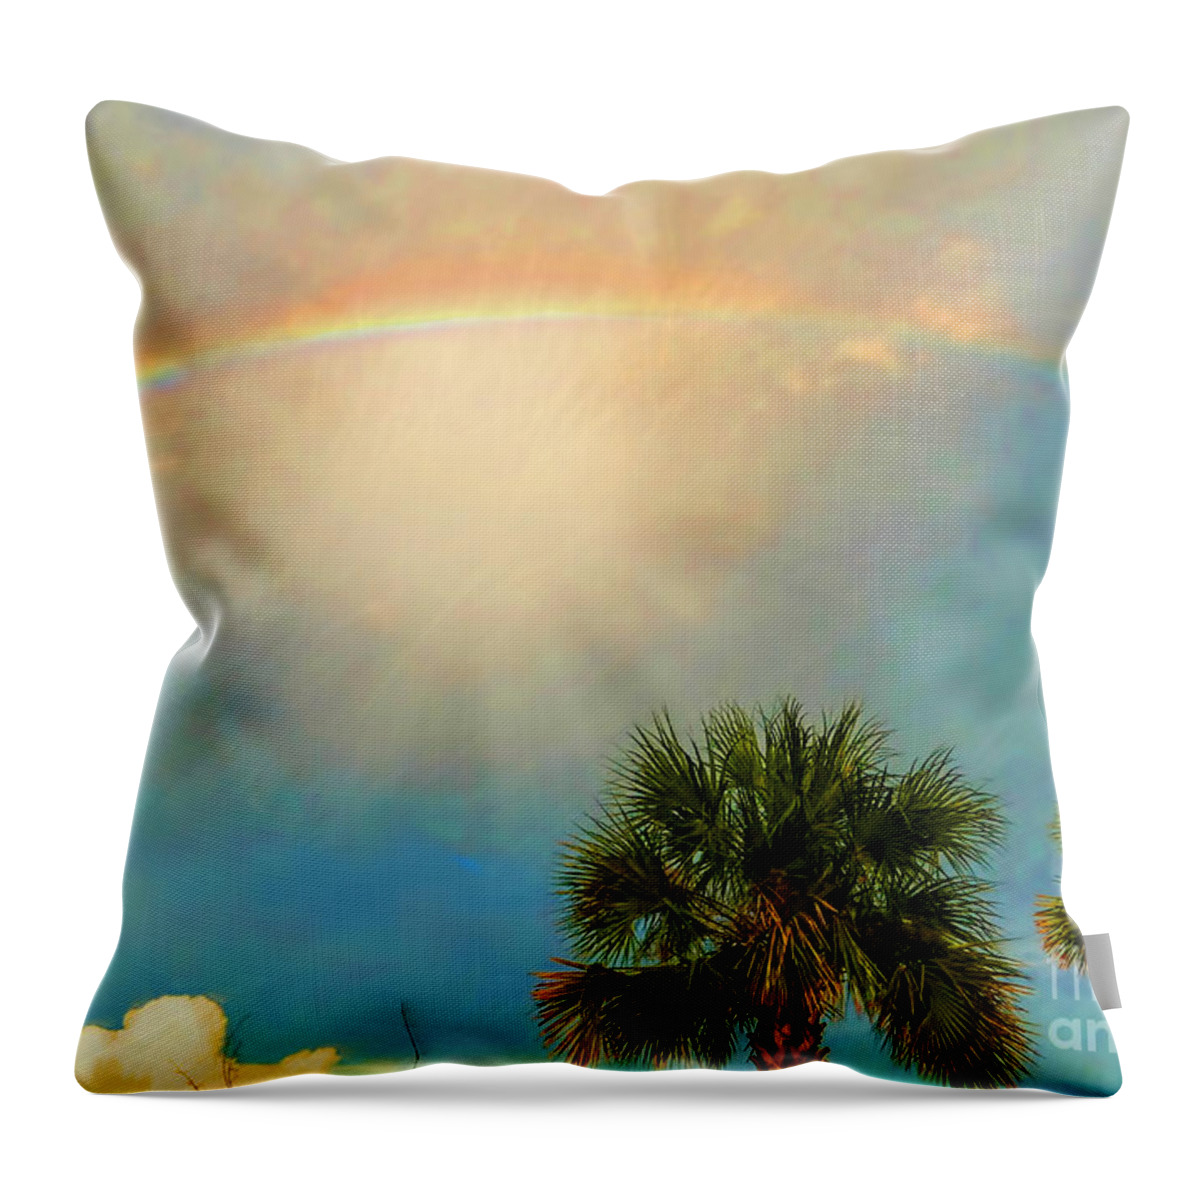 Rainbow Throw Pillow featuring the photograph After The Storm by Kathy Baccari